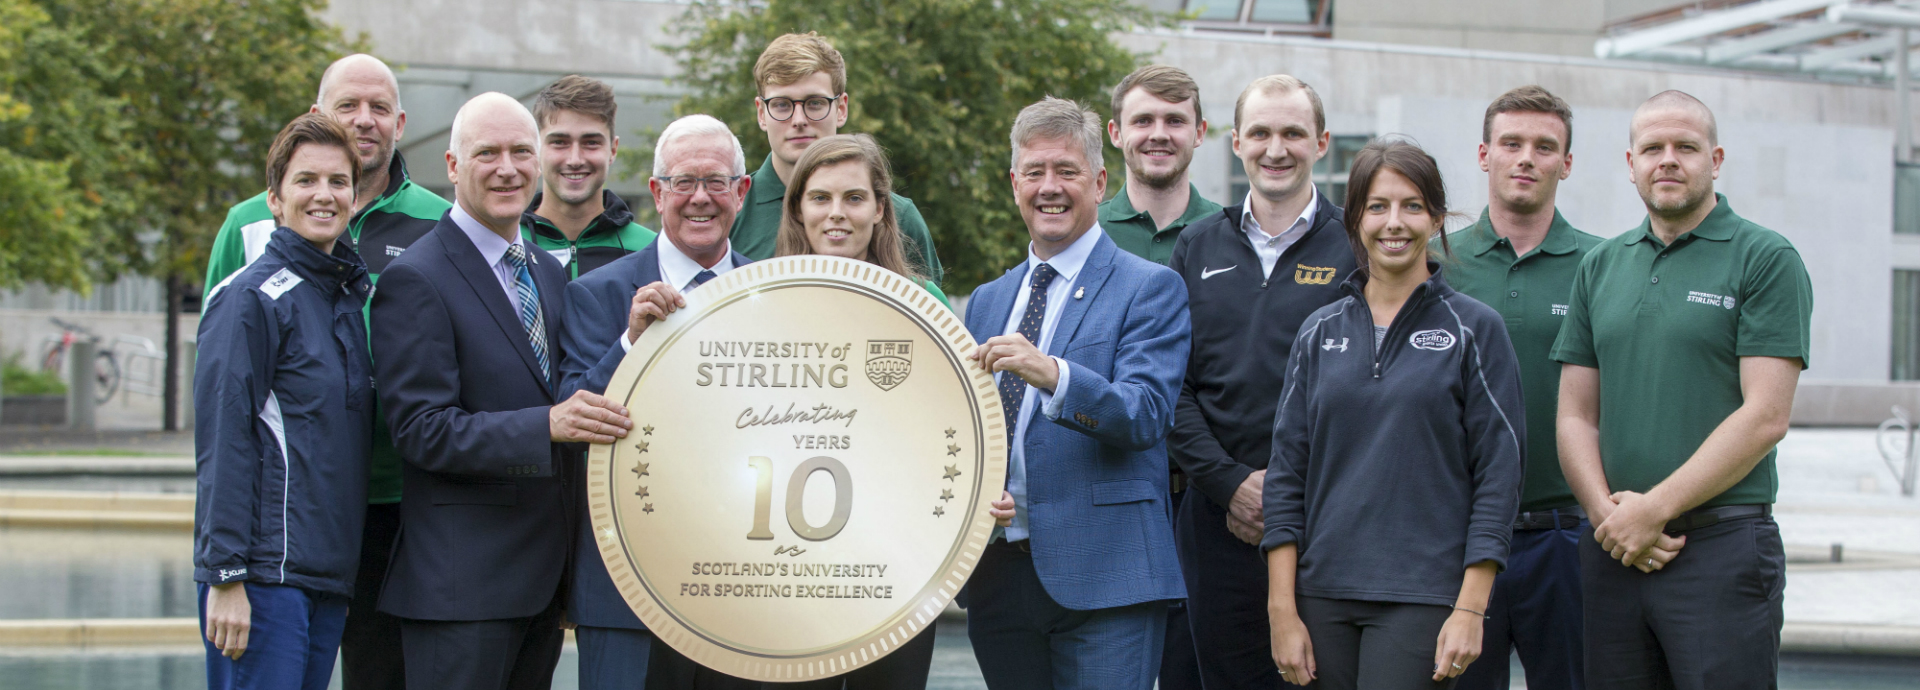 Stirling celebrates 10 years as Scotland's University for Sporting Excellence.